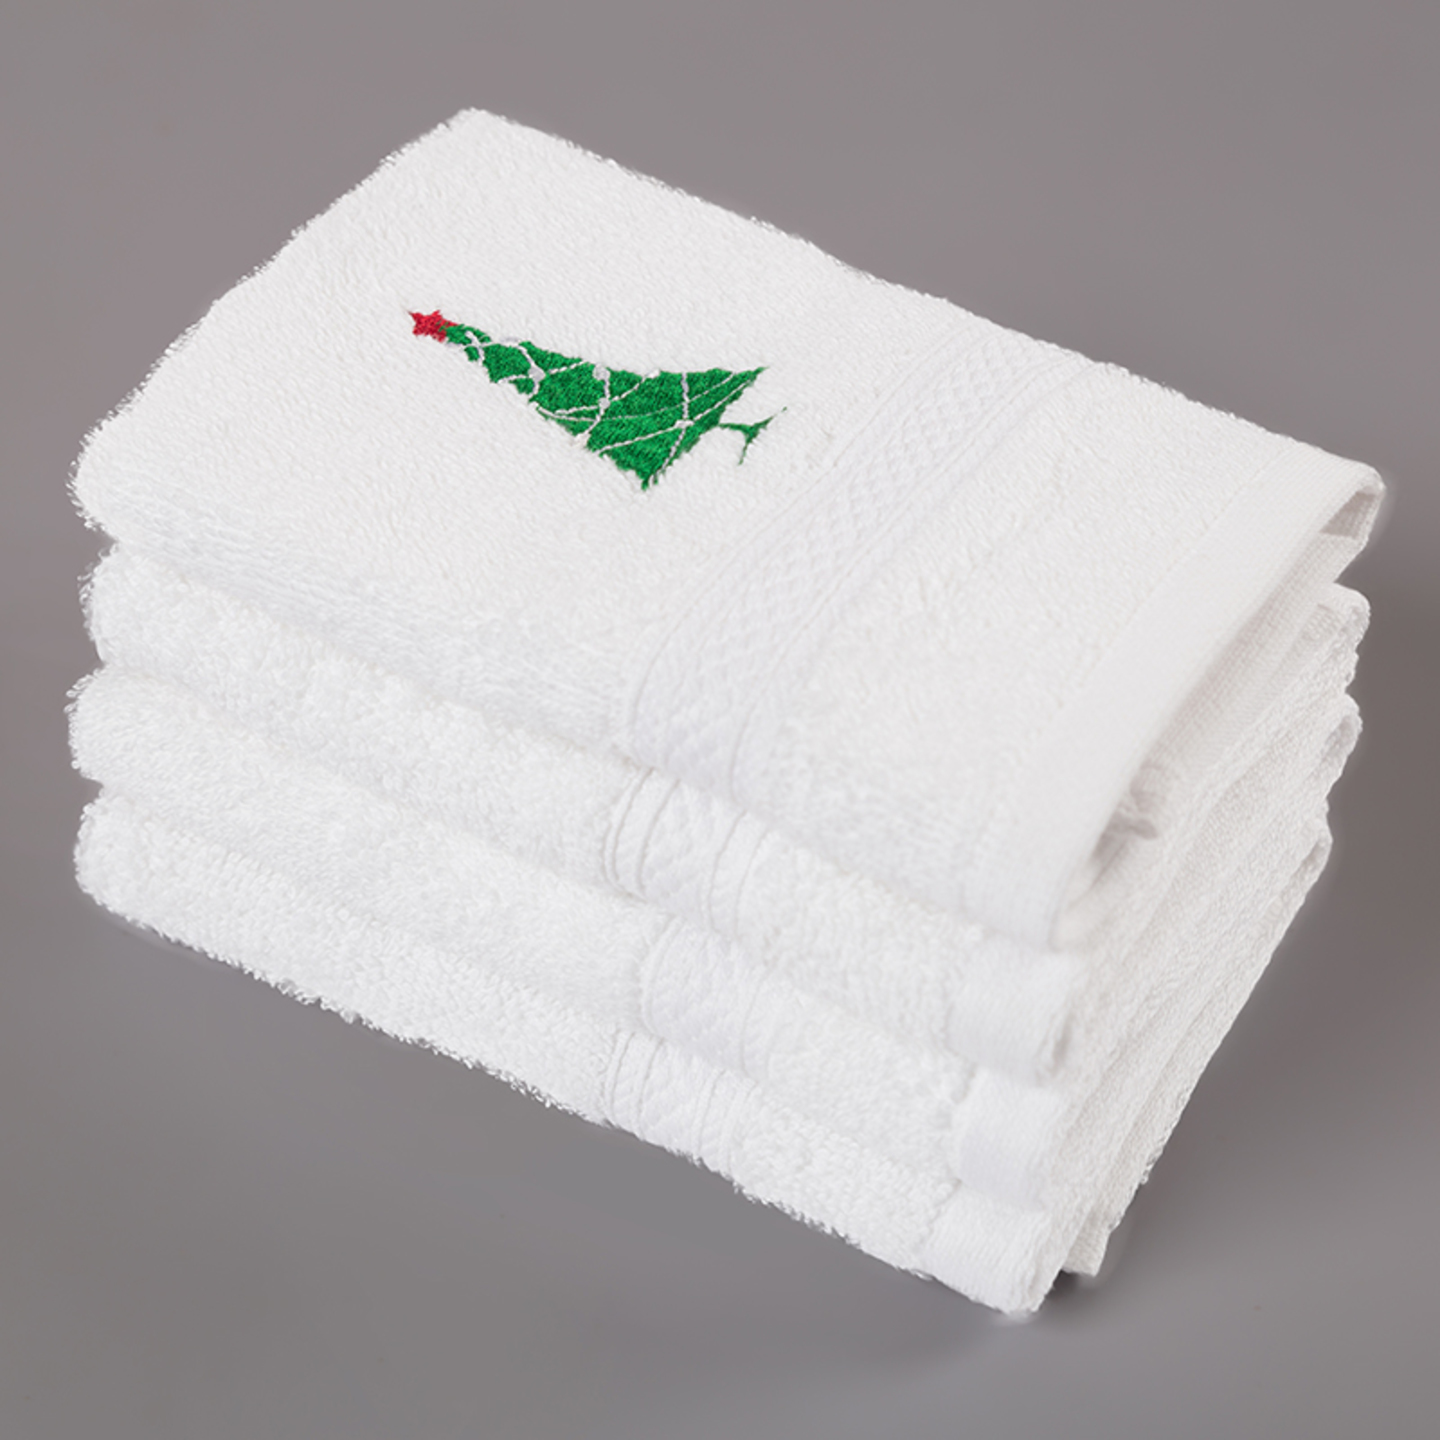 Christmas Tree Embroidered 100% Cotton Ultralux Face Towels – Set of 4